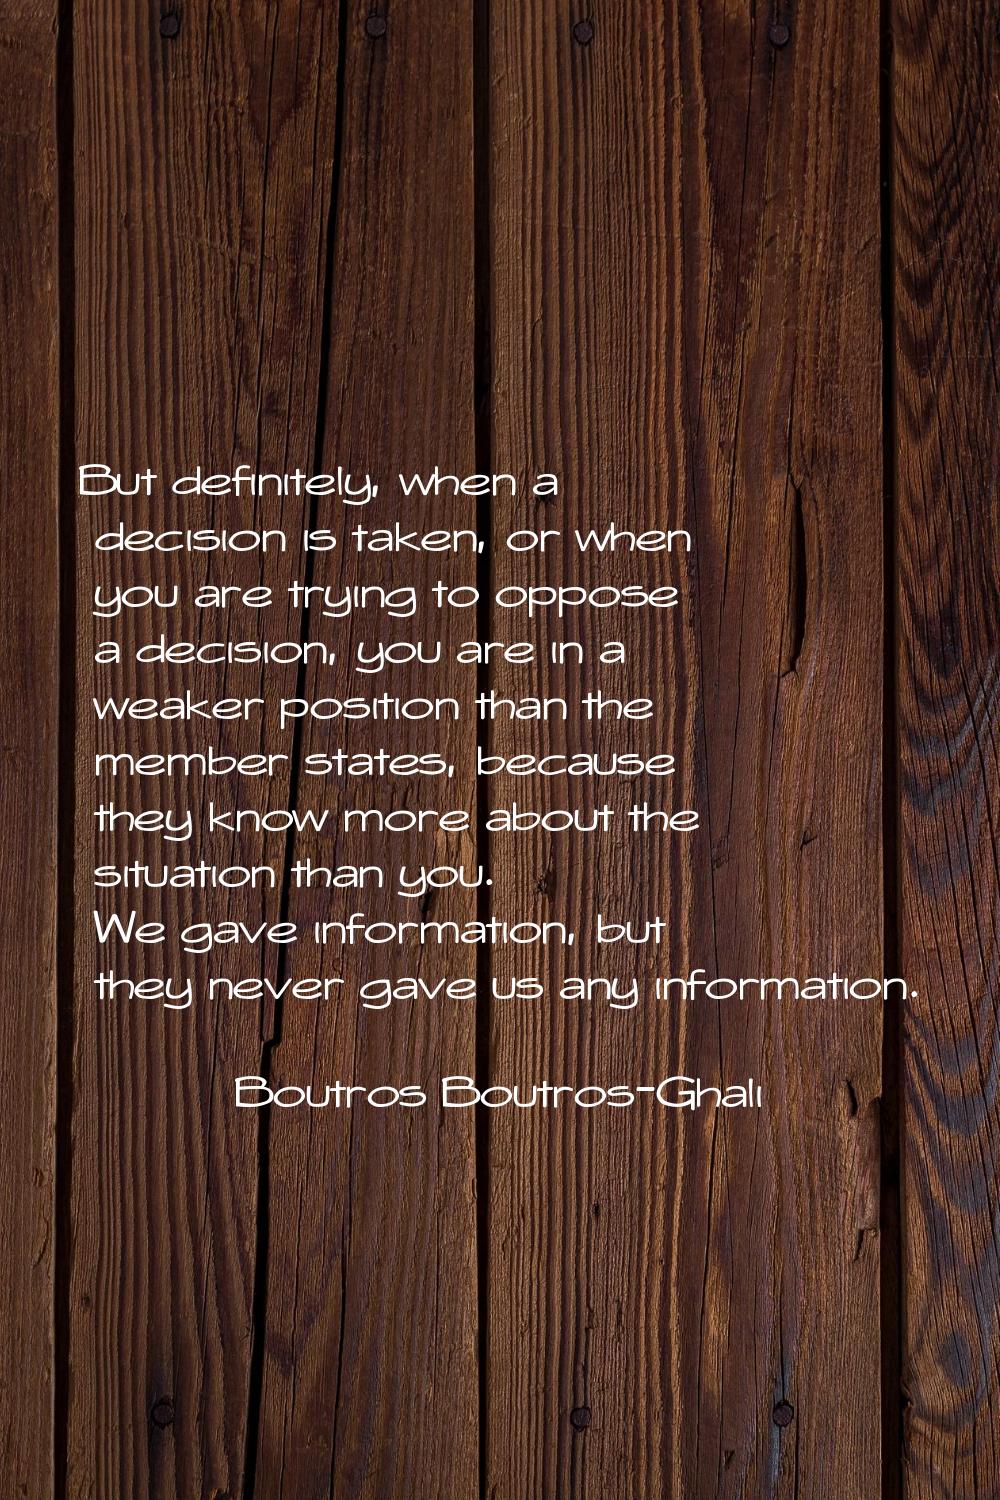 But definitely, when a decision is taken, or when you are trying to oppose a decision, you are in a